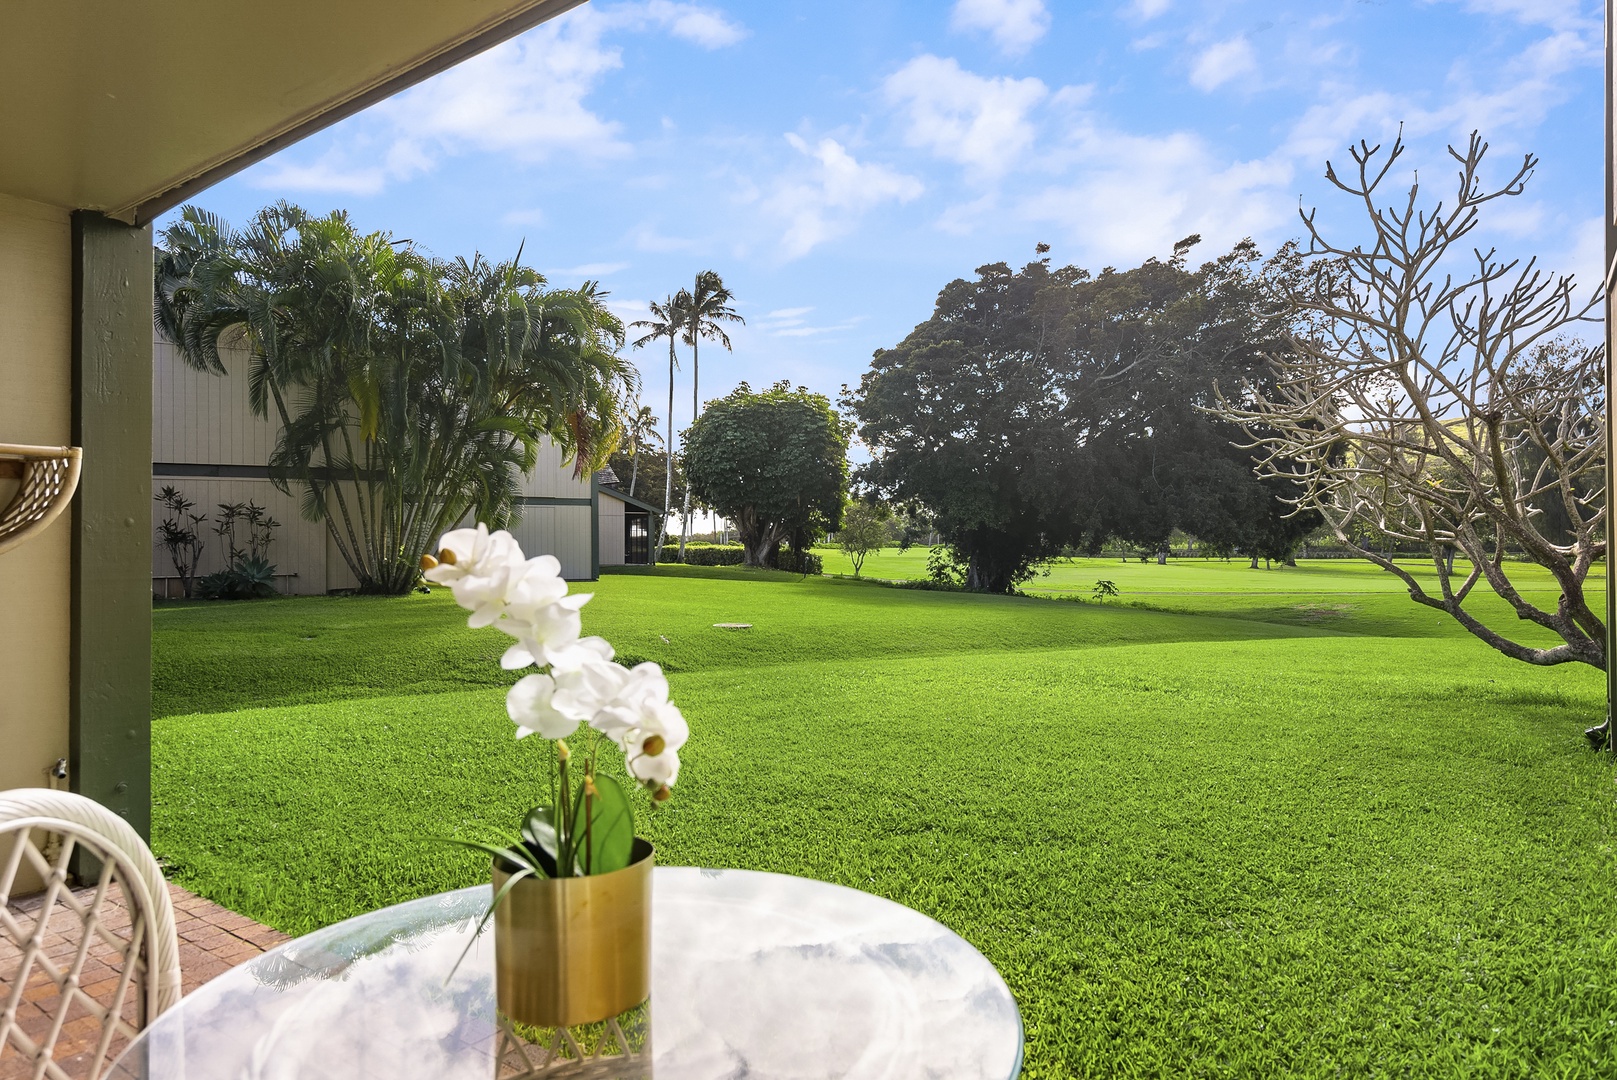 Kahuku Vacation Rentals, Pulelehua Kuilima Estates West #142 - Enjoy peaceful mornings looking out into the green